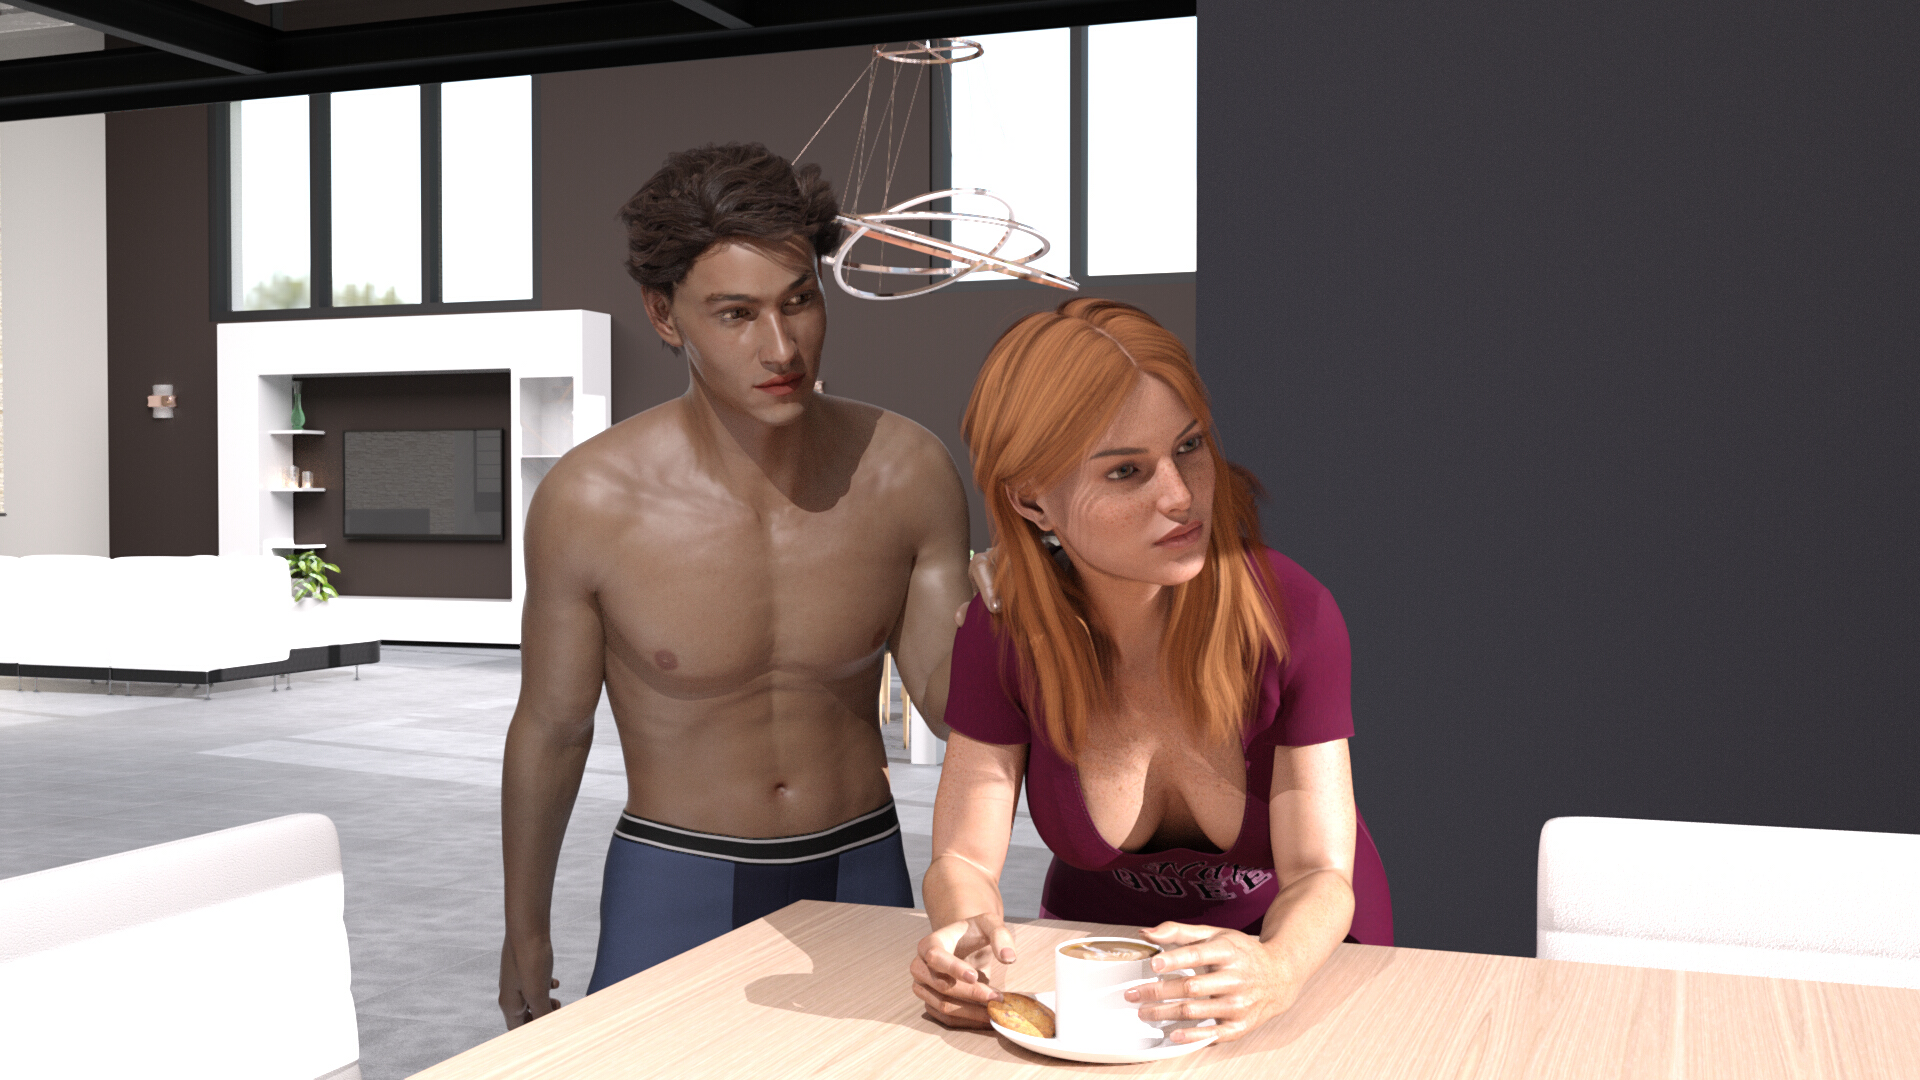 My Brothers Wife v0.1 - free game download, reviews, mega picture